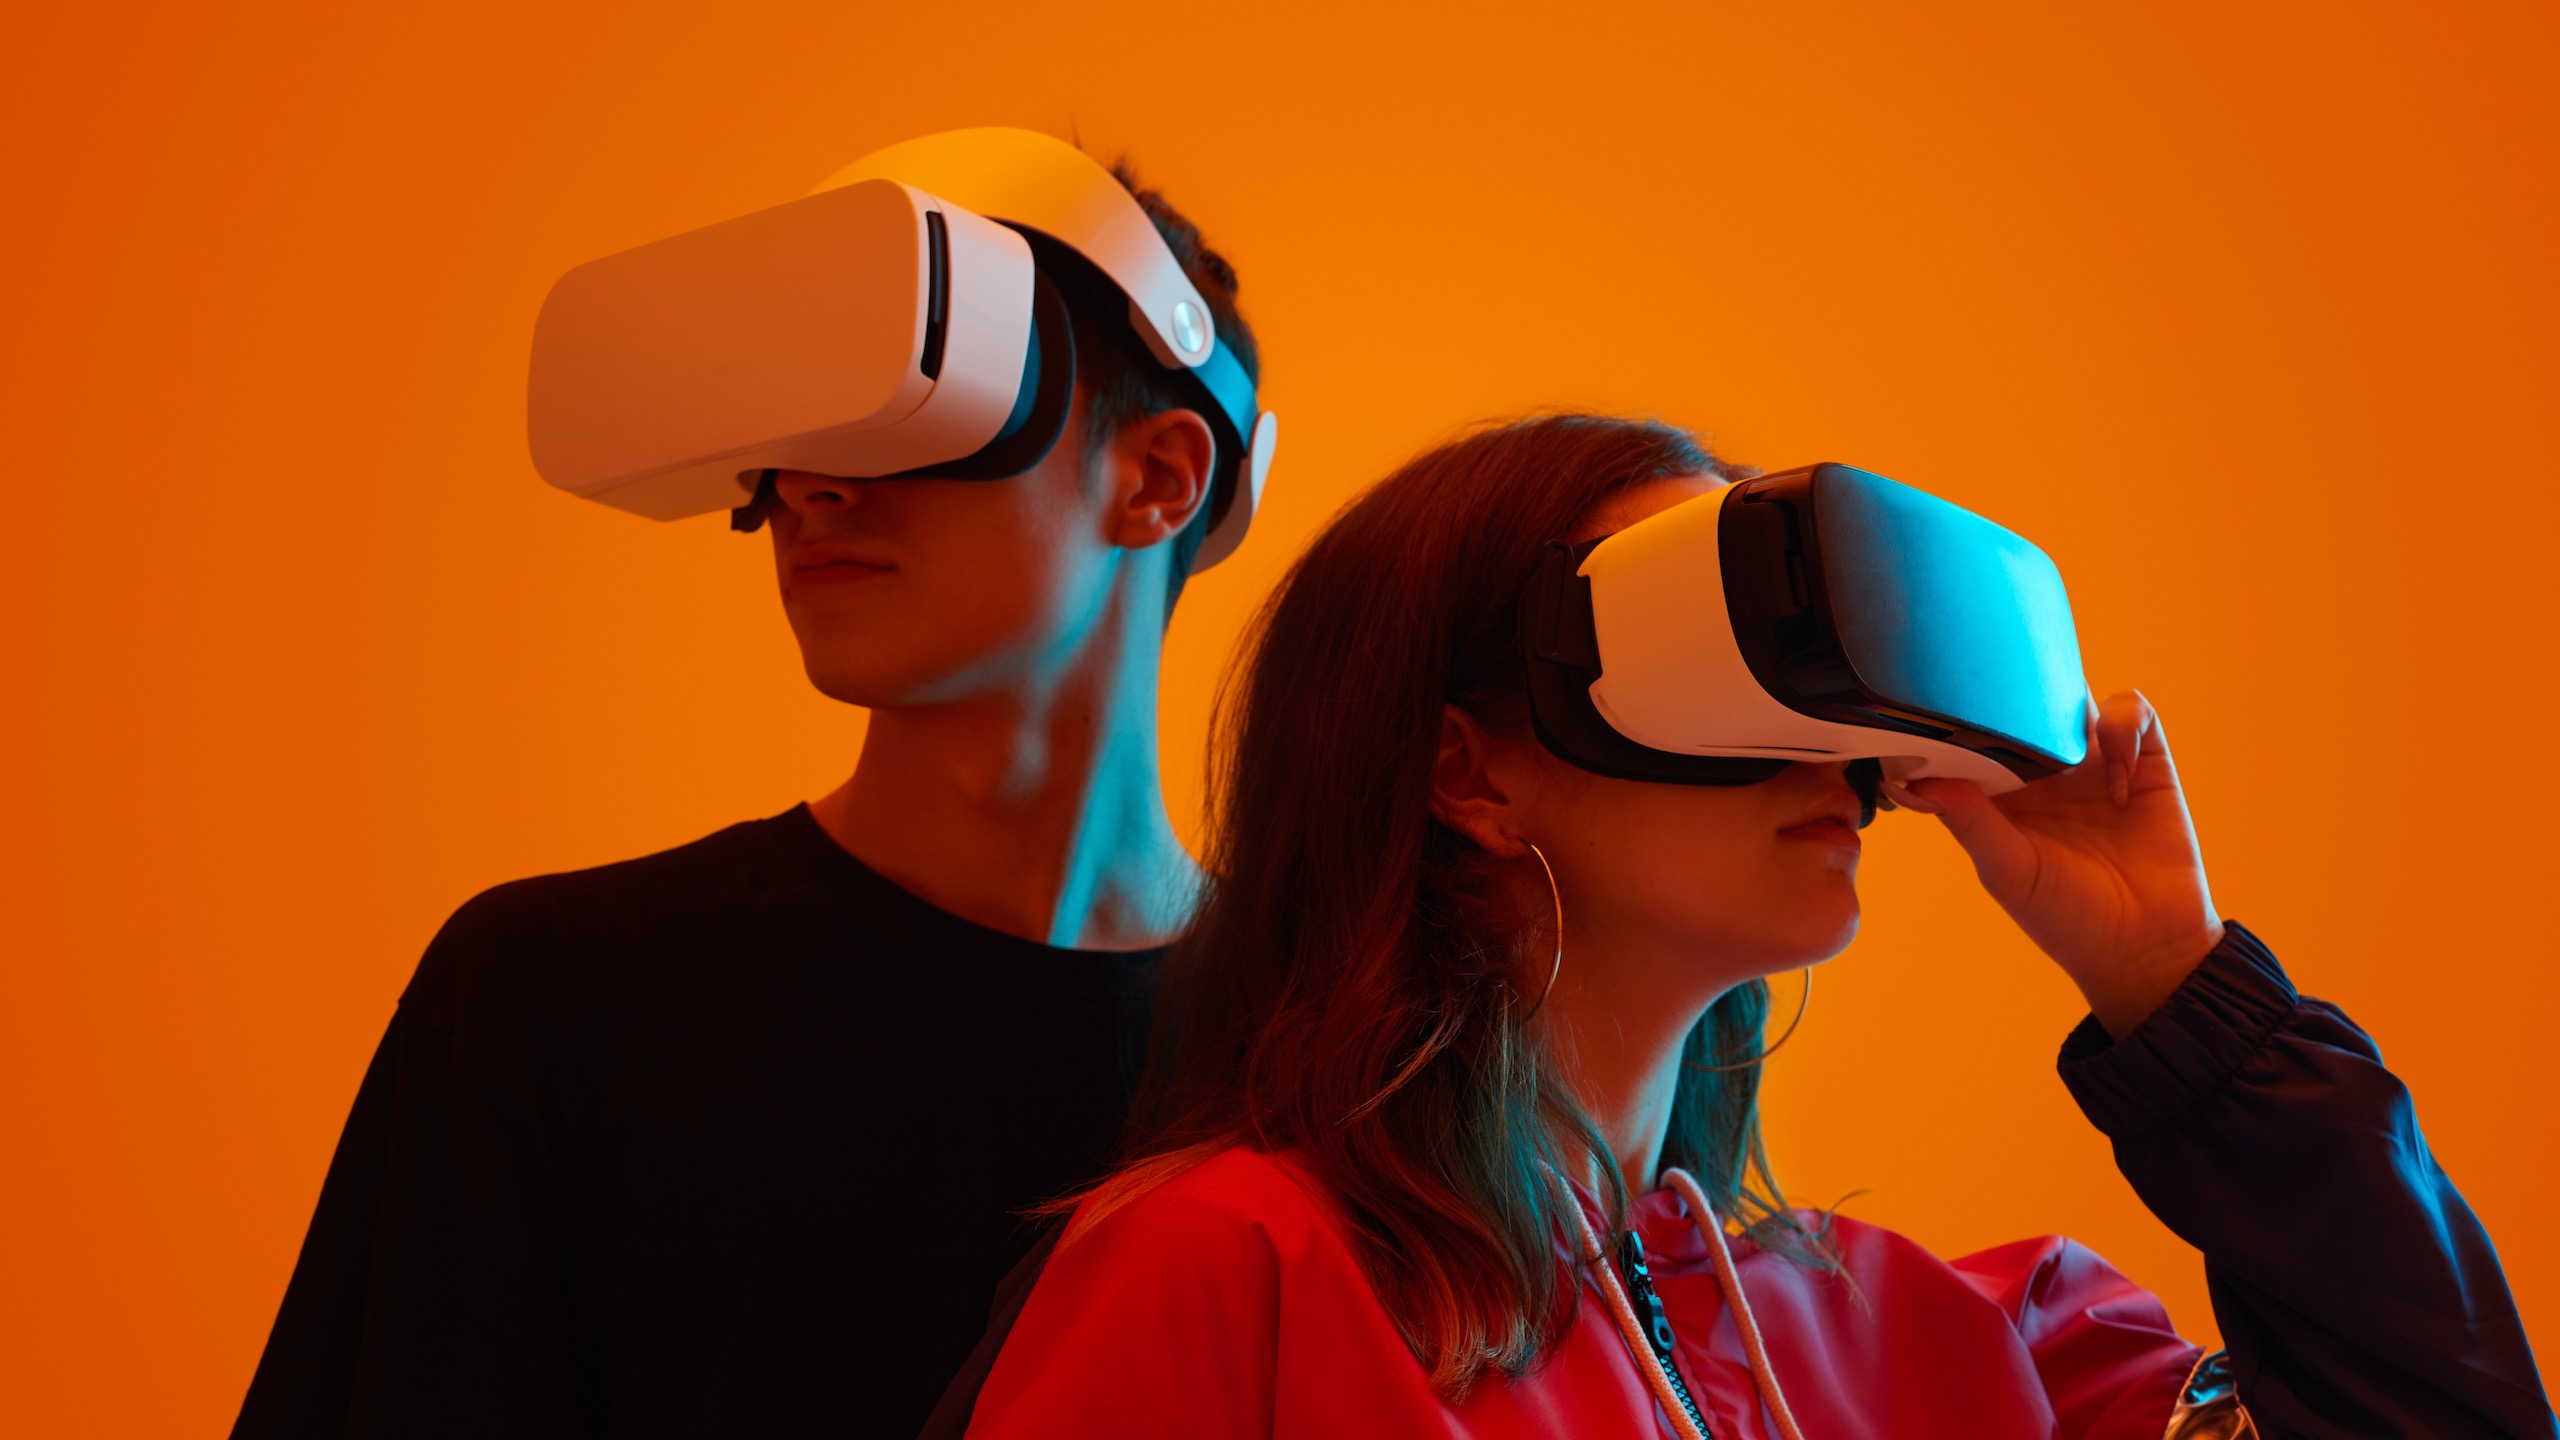 Dating.com Pursues Virtual Dating Vision in the Metaverse